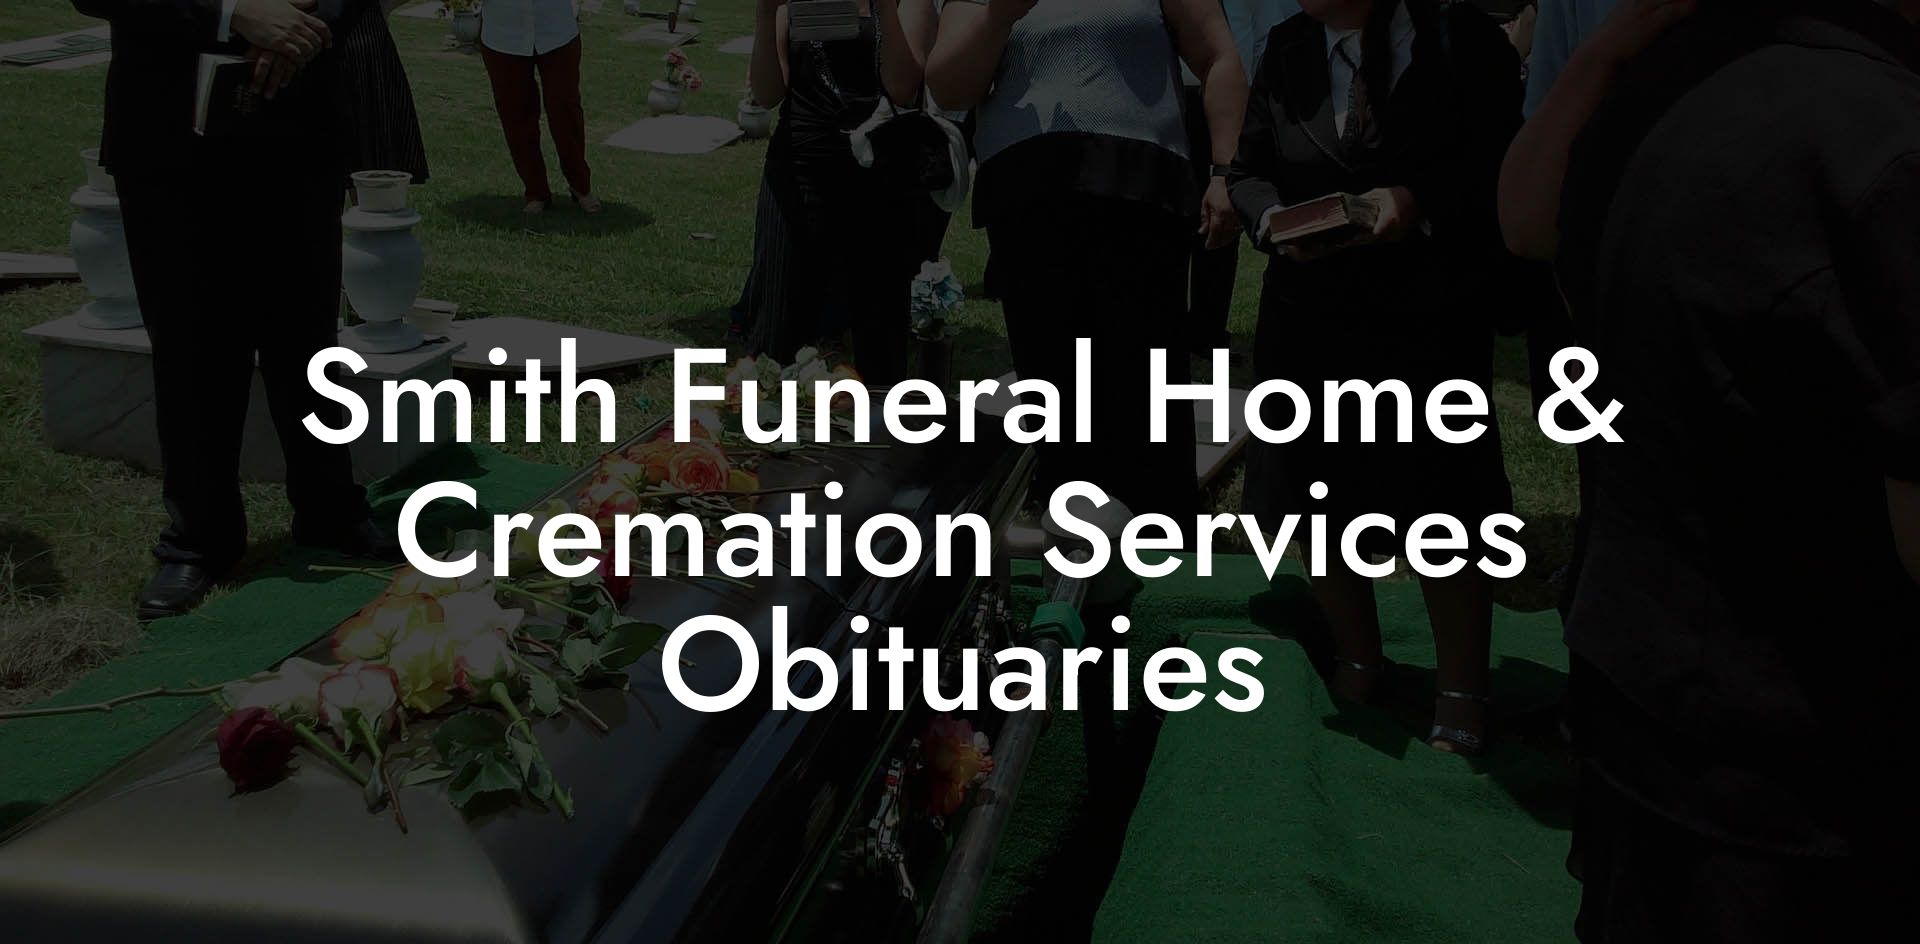 Smith Funeral Home & Cremation Services Obituaries